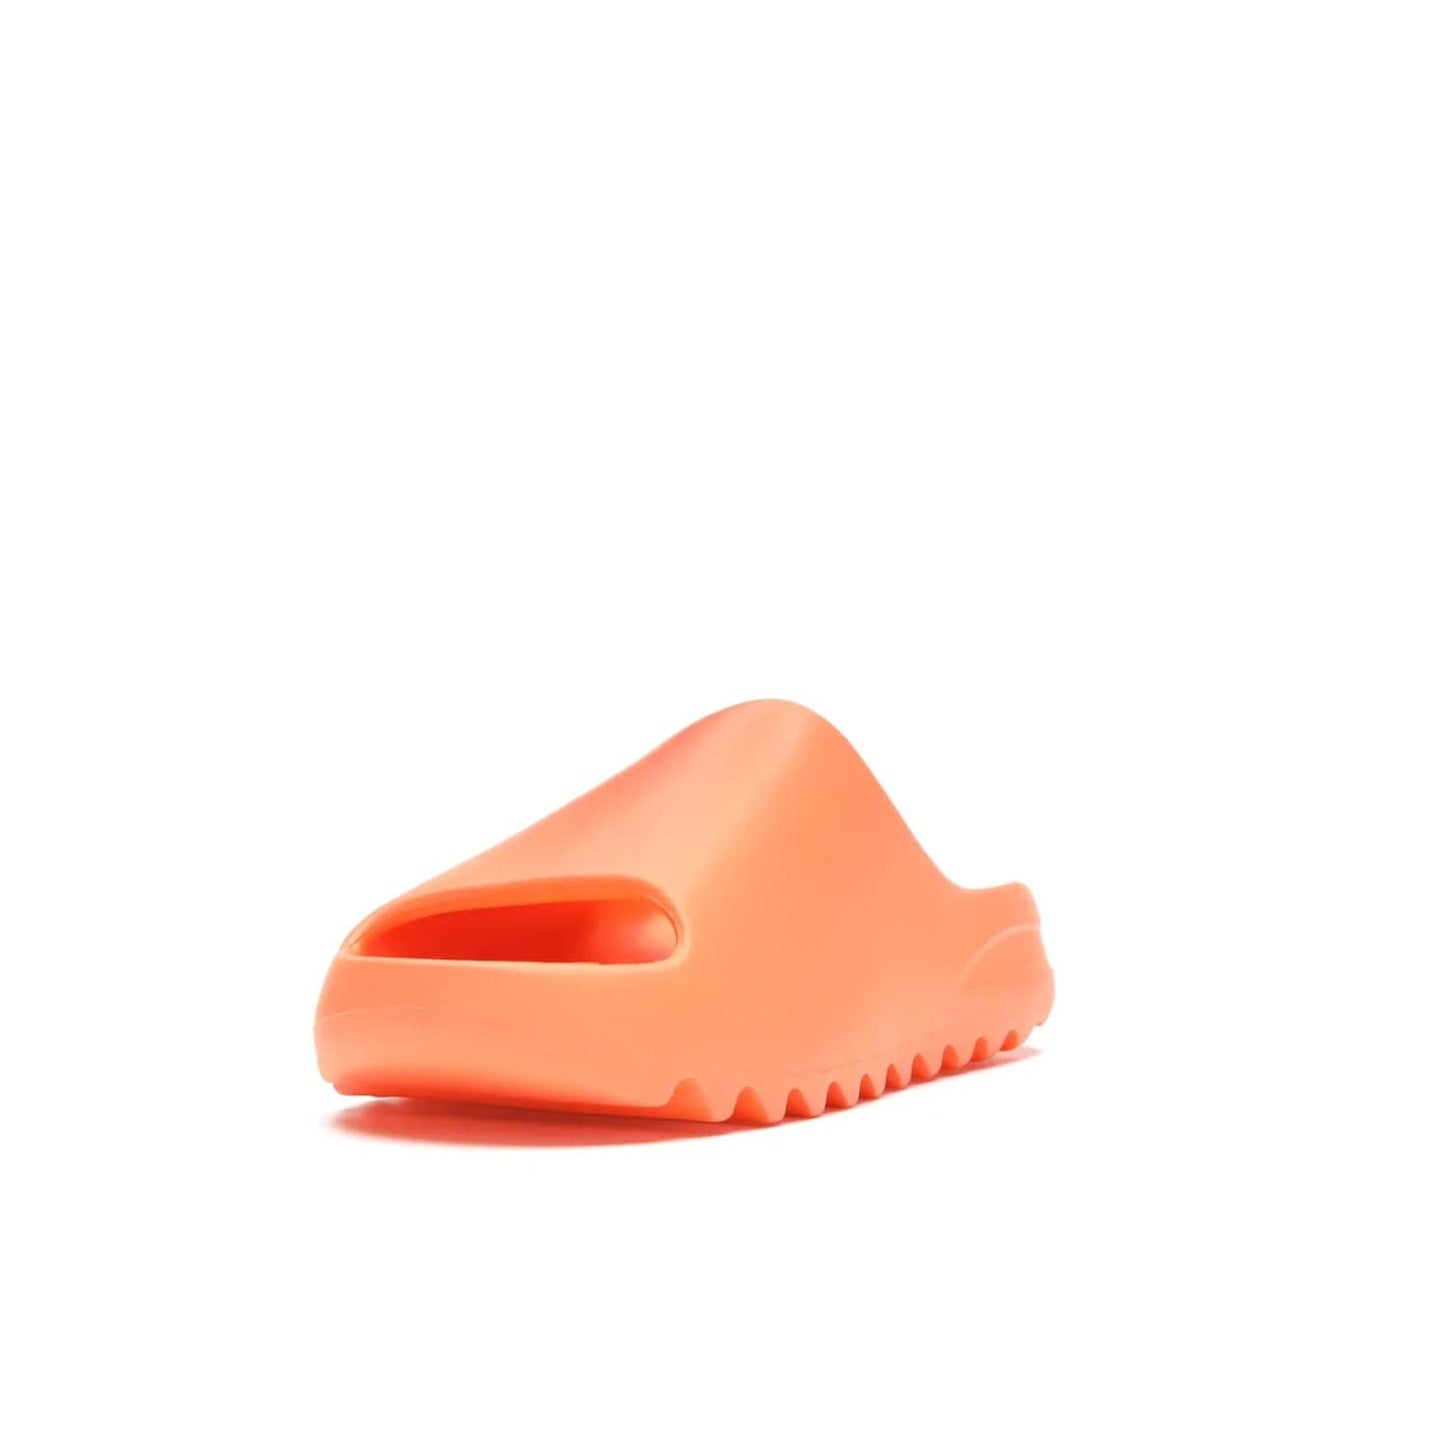 adidas Yeezy Slide Enflame Orange - Image 13 - Only at www.BallersClubKickz.com - Limited edition adidas Yeezy Slide featuring a bold Enflame Orange upper and EVA foam construction. Grooved outsole for traction and support. Released June 2021. Perfect for summer.